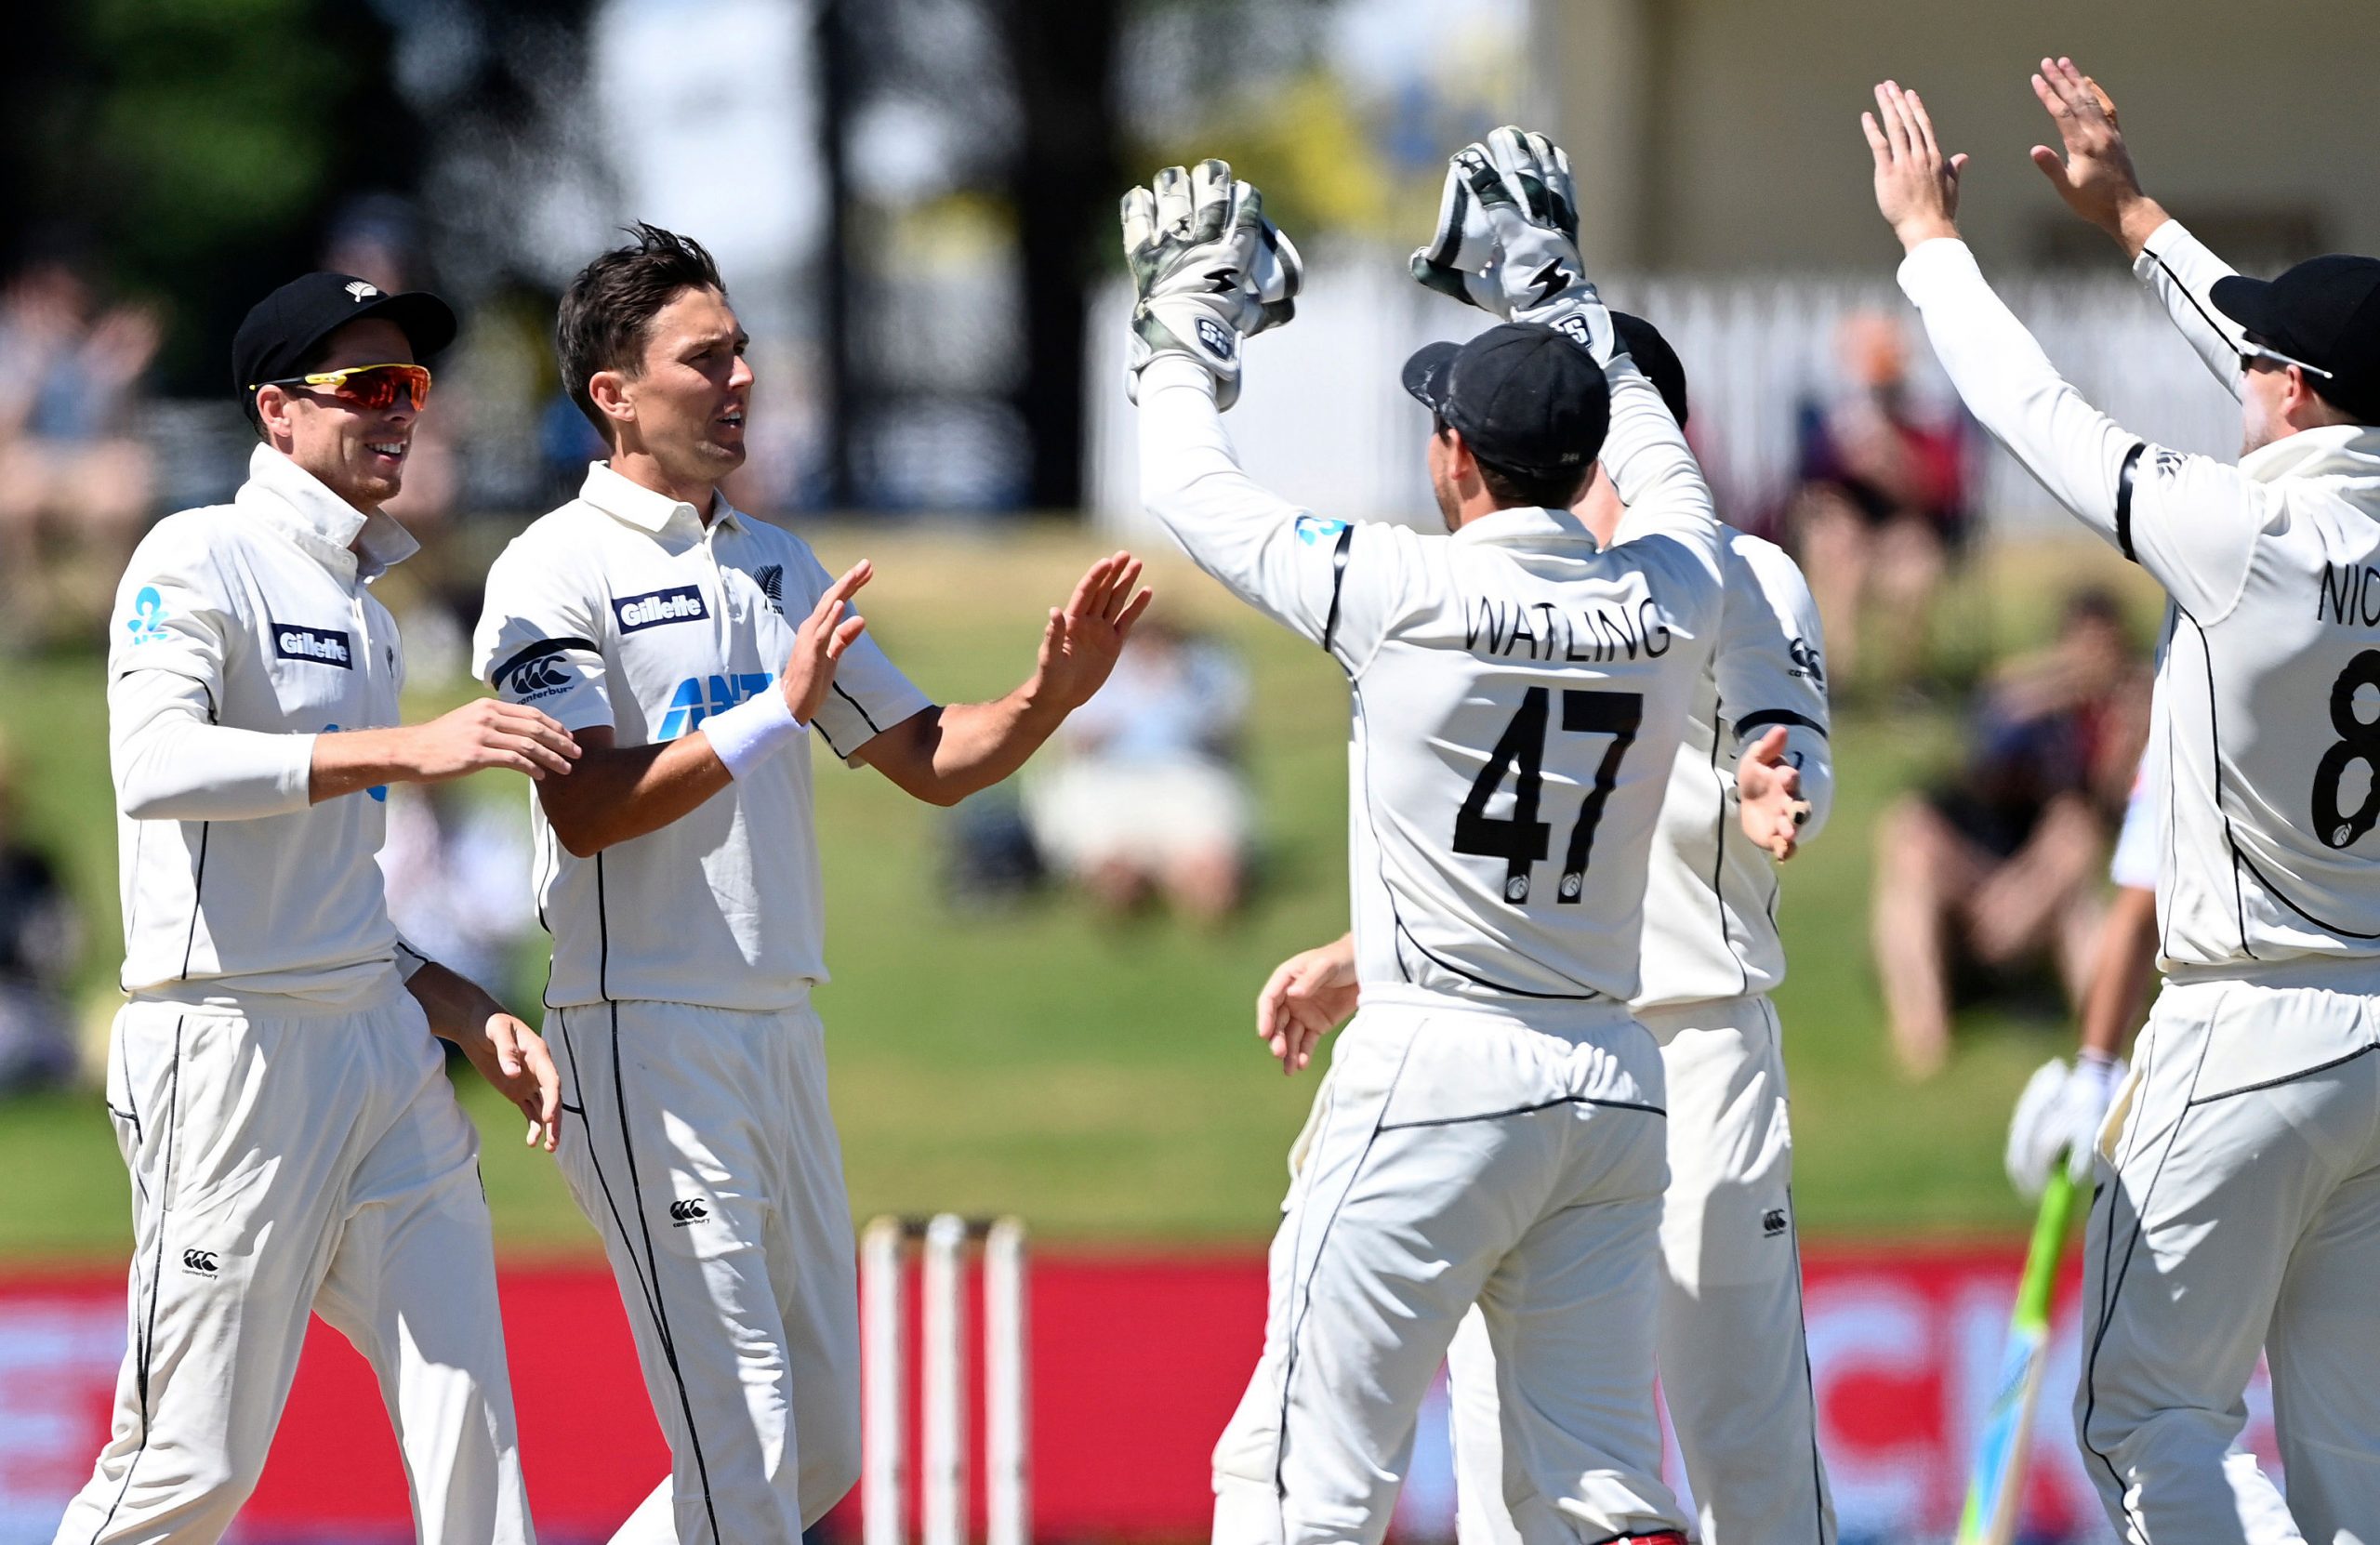 New Zealands Jamieson takes three wickets against Pakistan in Oval